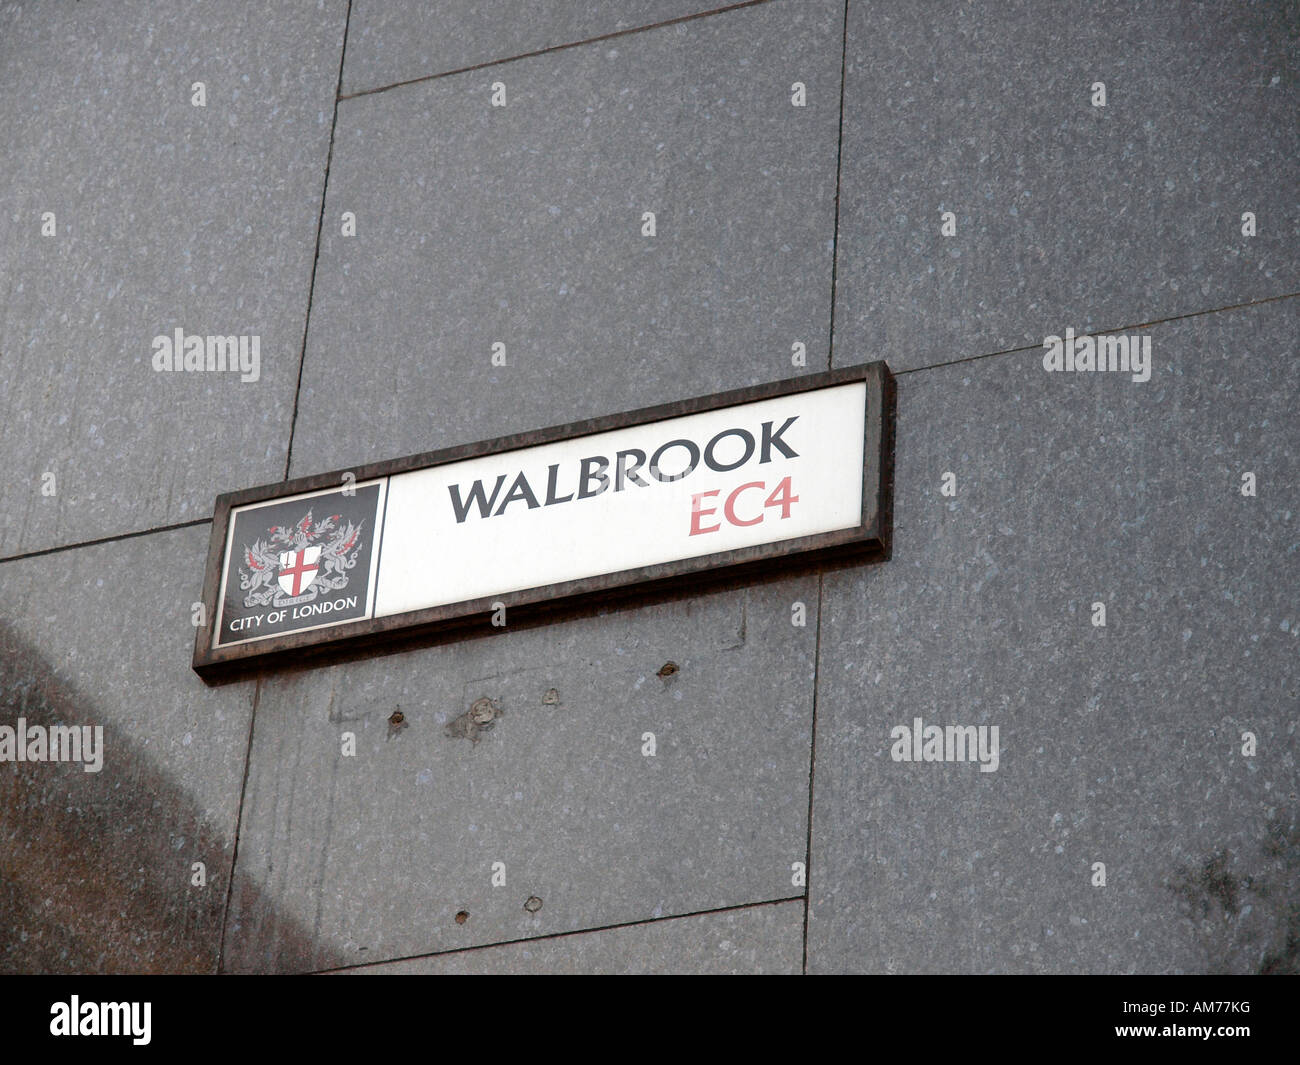 Street sign for Walbrook in The City of London EC4 Stock Photo